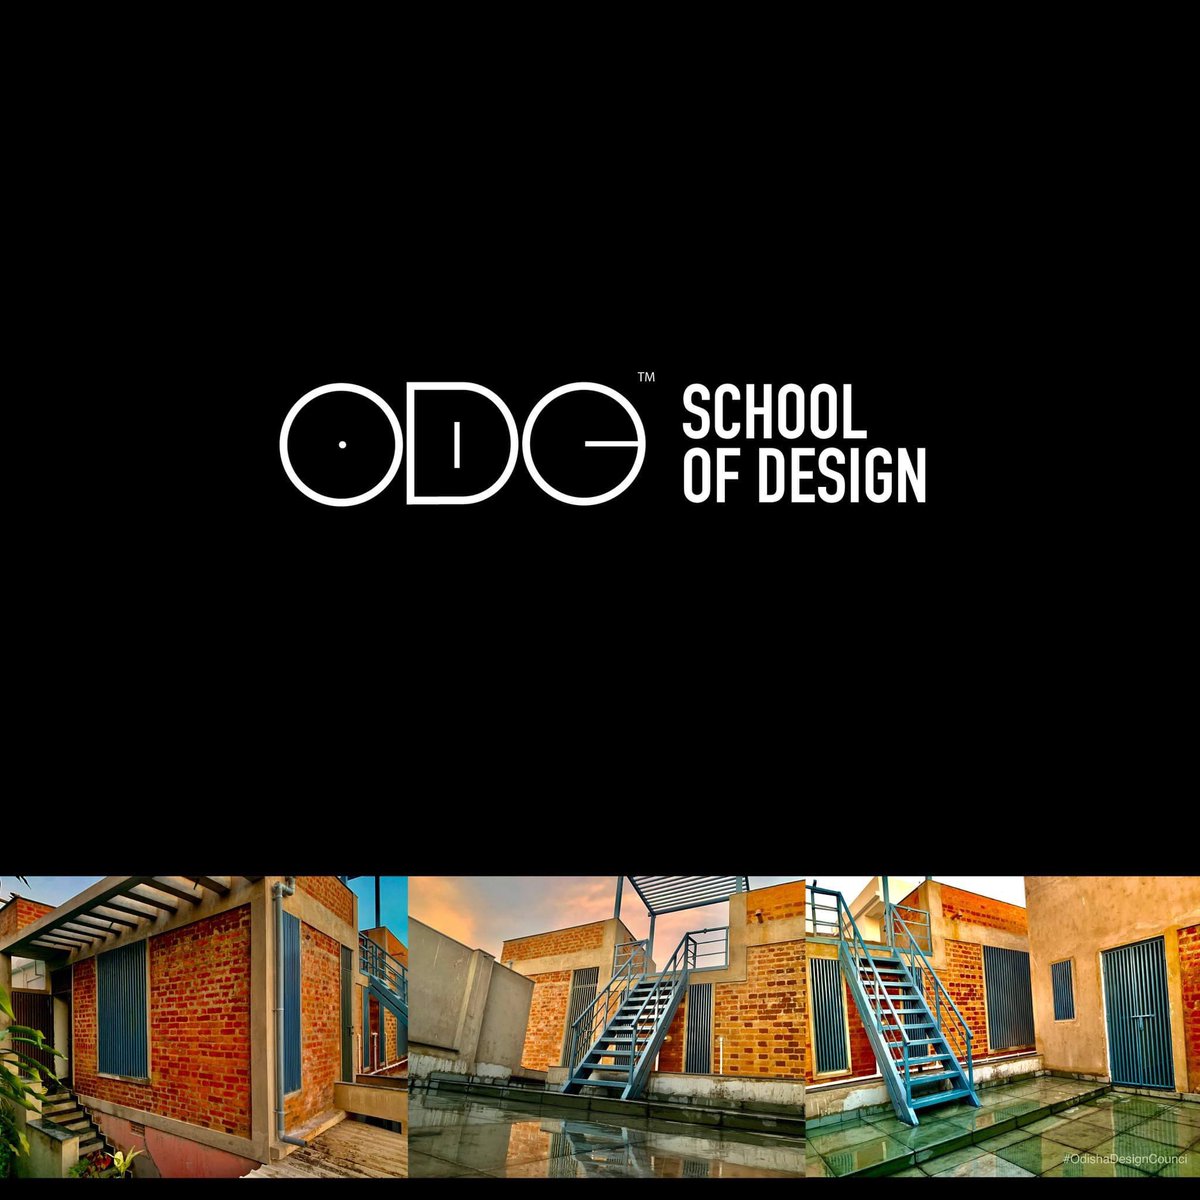 Introducing ODC School of Design: Where Tradition Meets Innovation. Join us on our journey to redefine #designeducation in #Odisha and beyond. #GlobalCurriculum #DesignExcellency #Cuttingedge @DesignODC @Naveen_Odisha